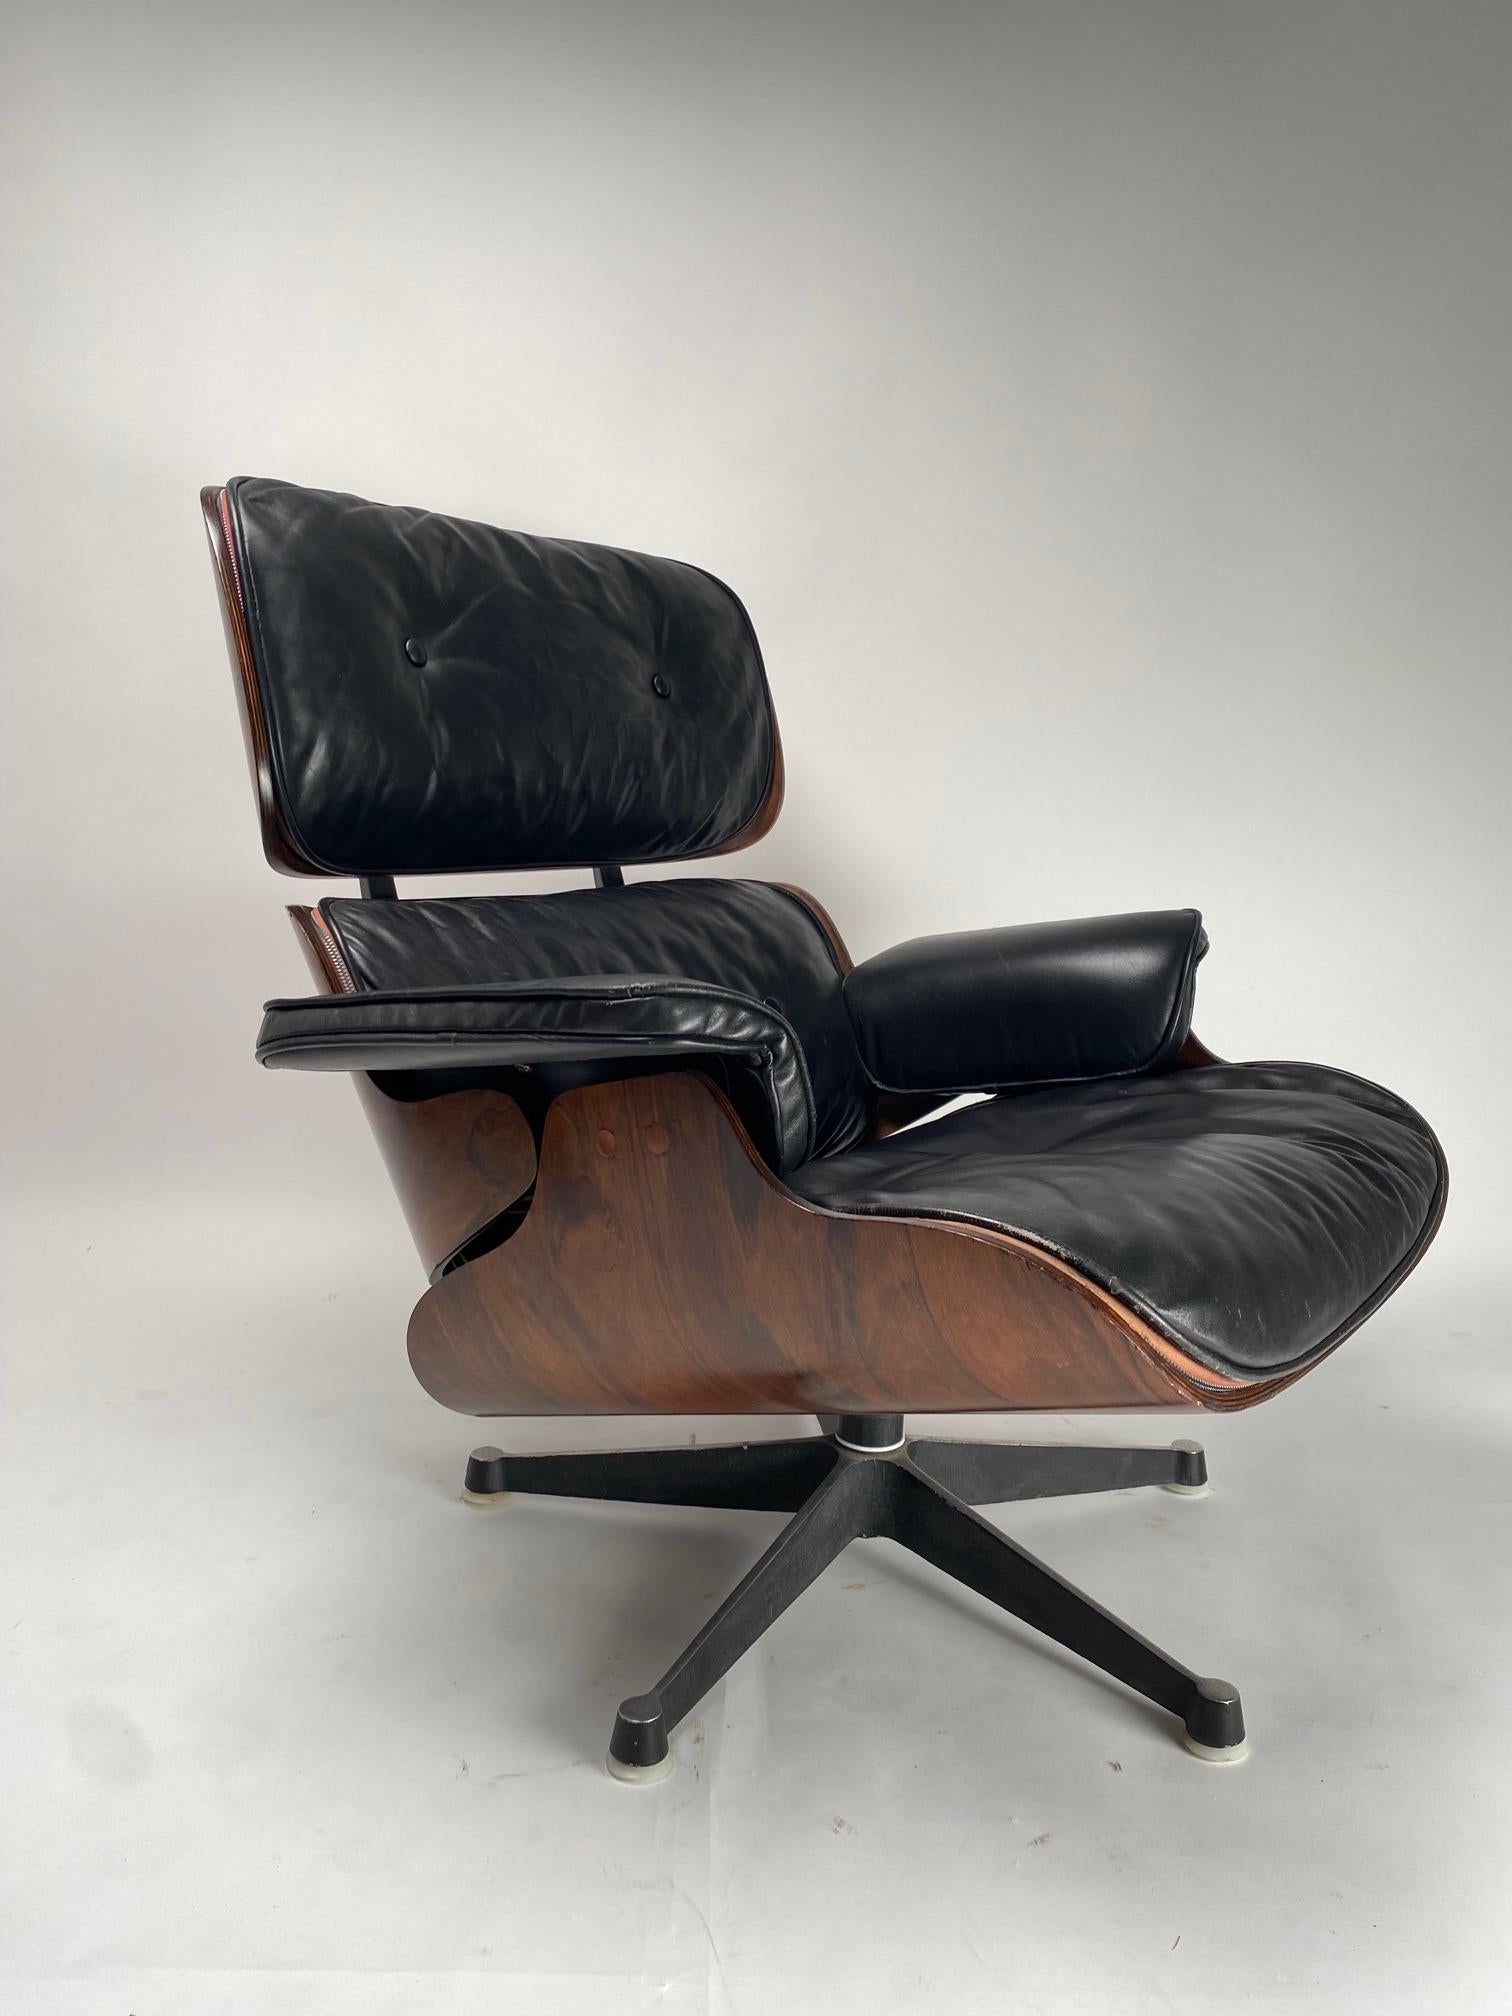 Eames Lounge is probably one of the most famous armchair designs in the world. The design couple Charles and Ray Eames designed  it in 1956 for Herman Miller. It was the first chair that the couple designed for a high-end market. Examples of these